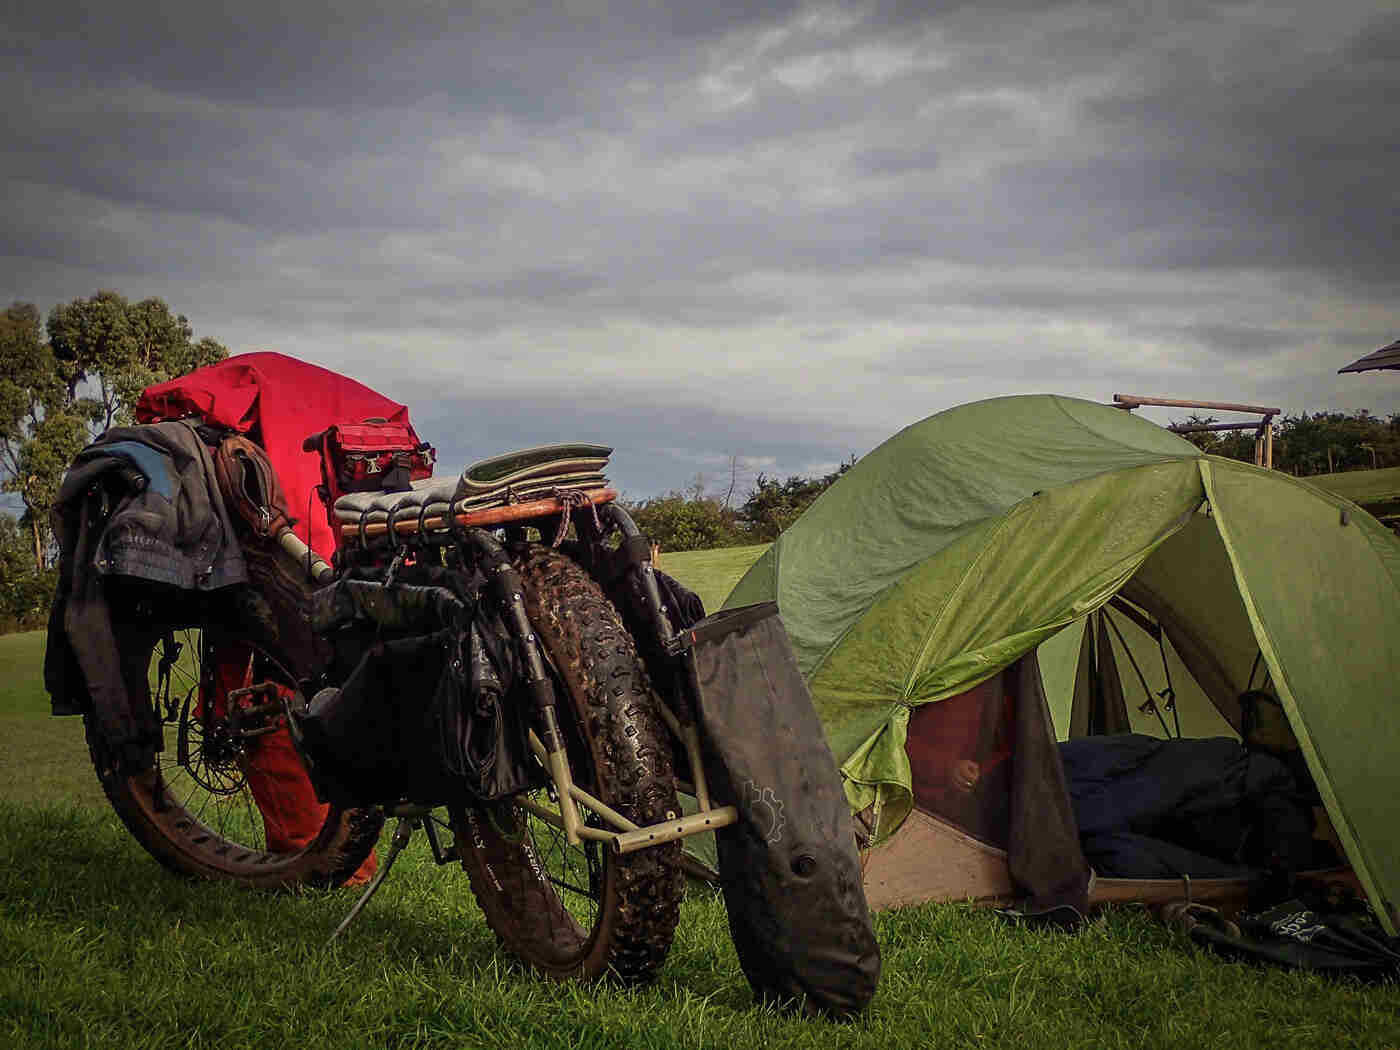 Rear view of a Surly Big Fat Dummy bike next to a green tent, in a grass field, with dark, gray clouds above